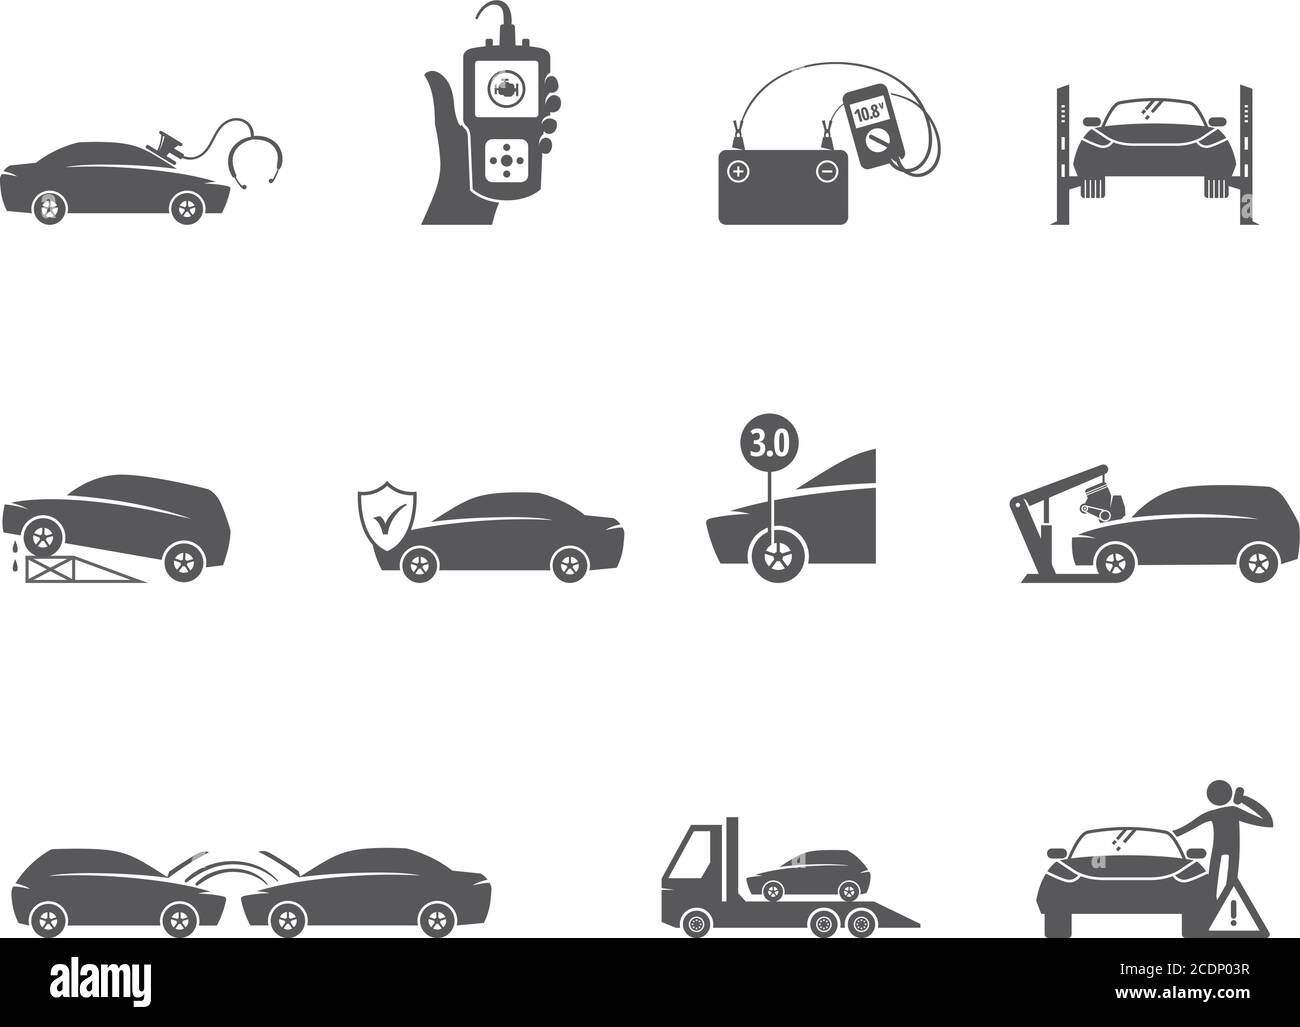 Car repair icons in black and white. Automotive vehicle maintenance service. Vector illustrations. Stock Vector